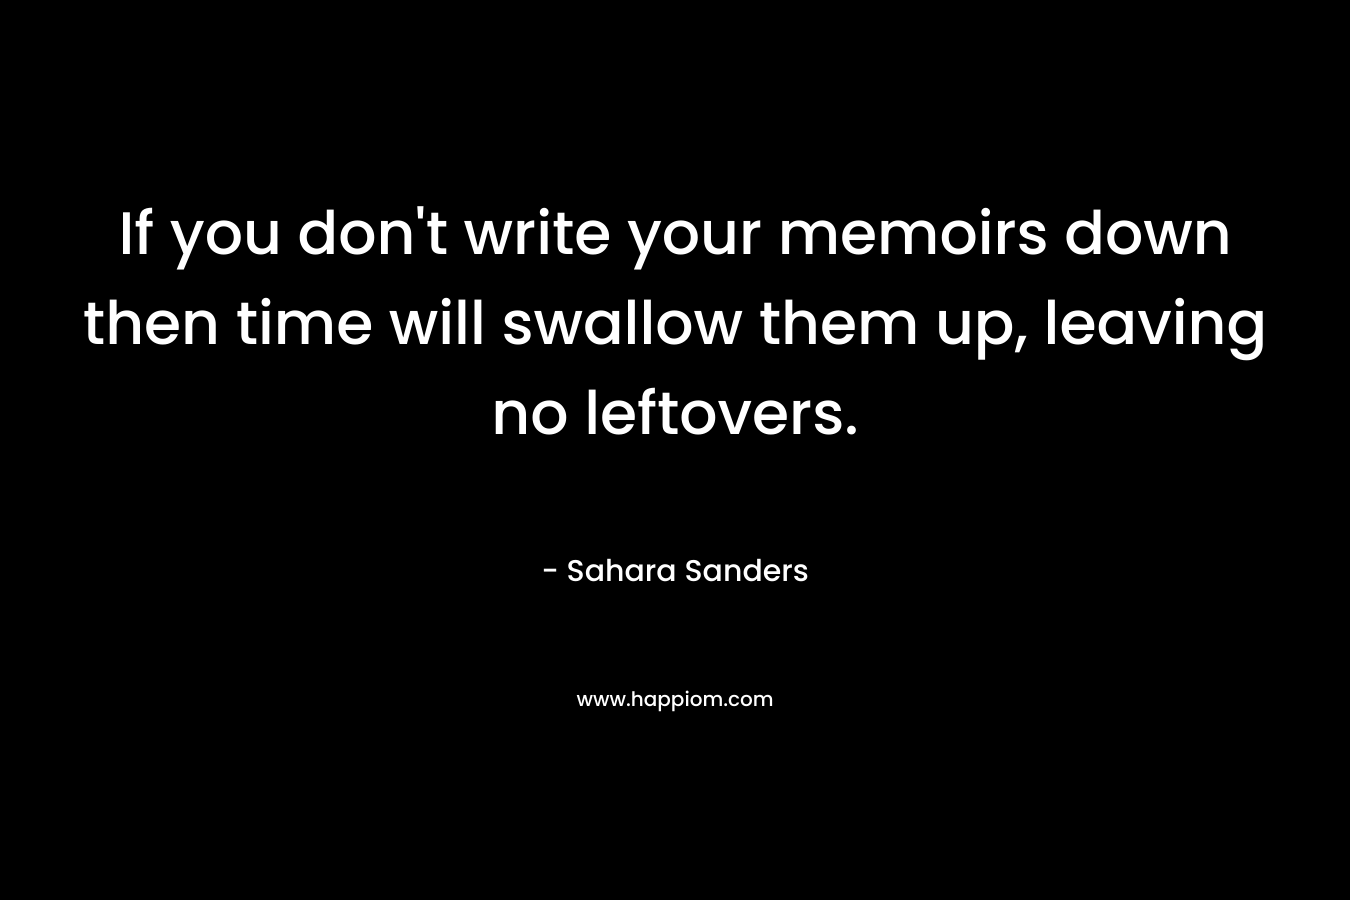 If you don’t write your memoirs down then time will swallow them up, leaving no leftovers. – Sahara Sanders